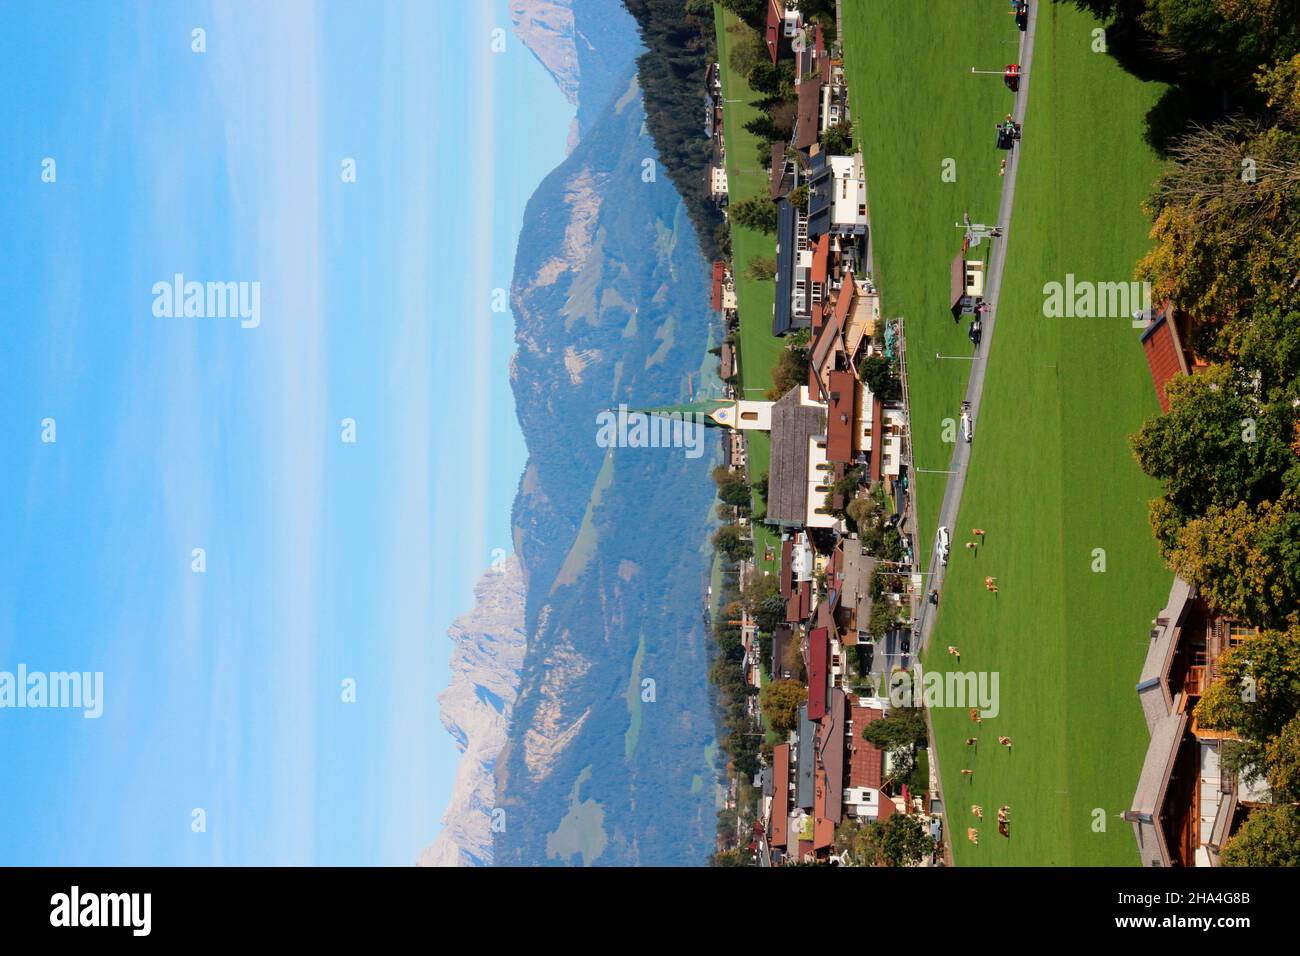 austria,tyrol,kaiser mountains,ellmau,place view,place,place overview,landscape,nature,alps,mountains,mountain range,alpine region,meadow,forest,green,travel destination,holiday region,church,steeple,sky,blue Stock Photo